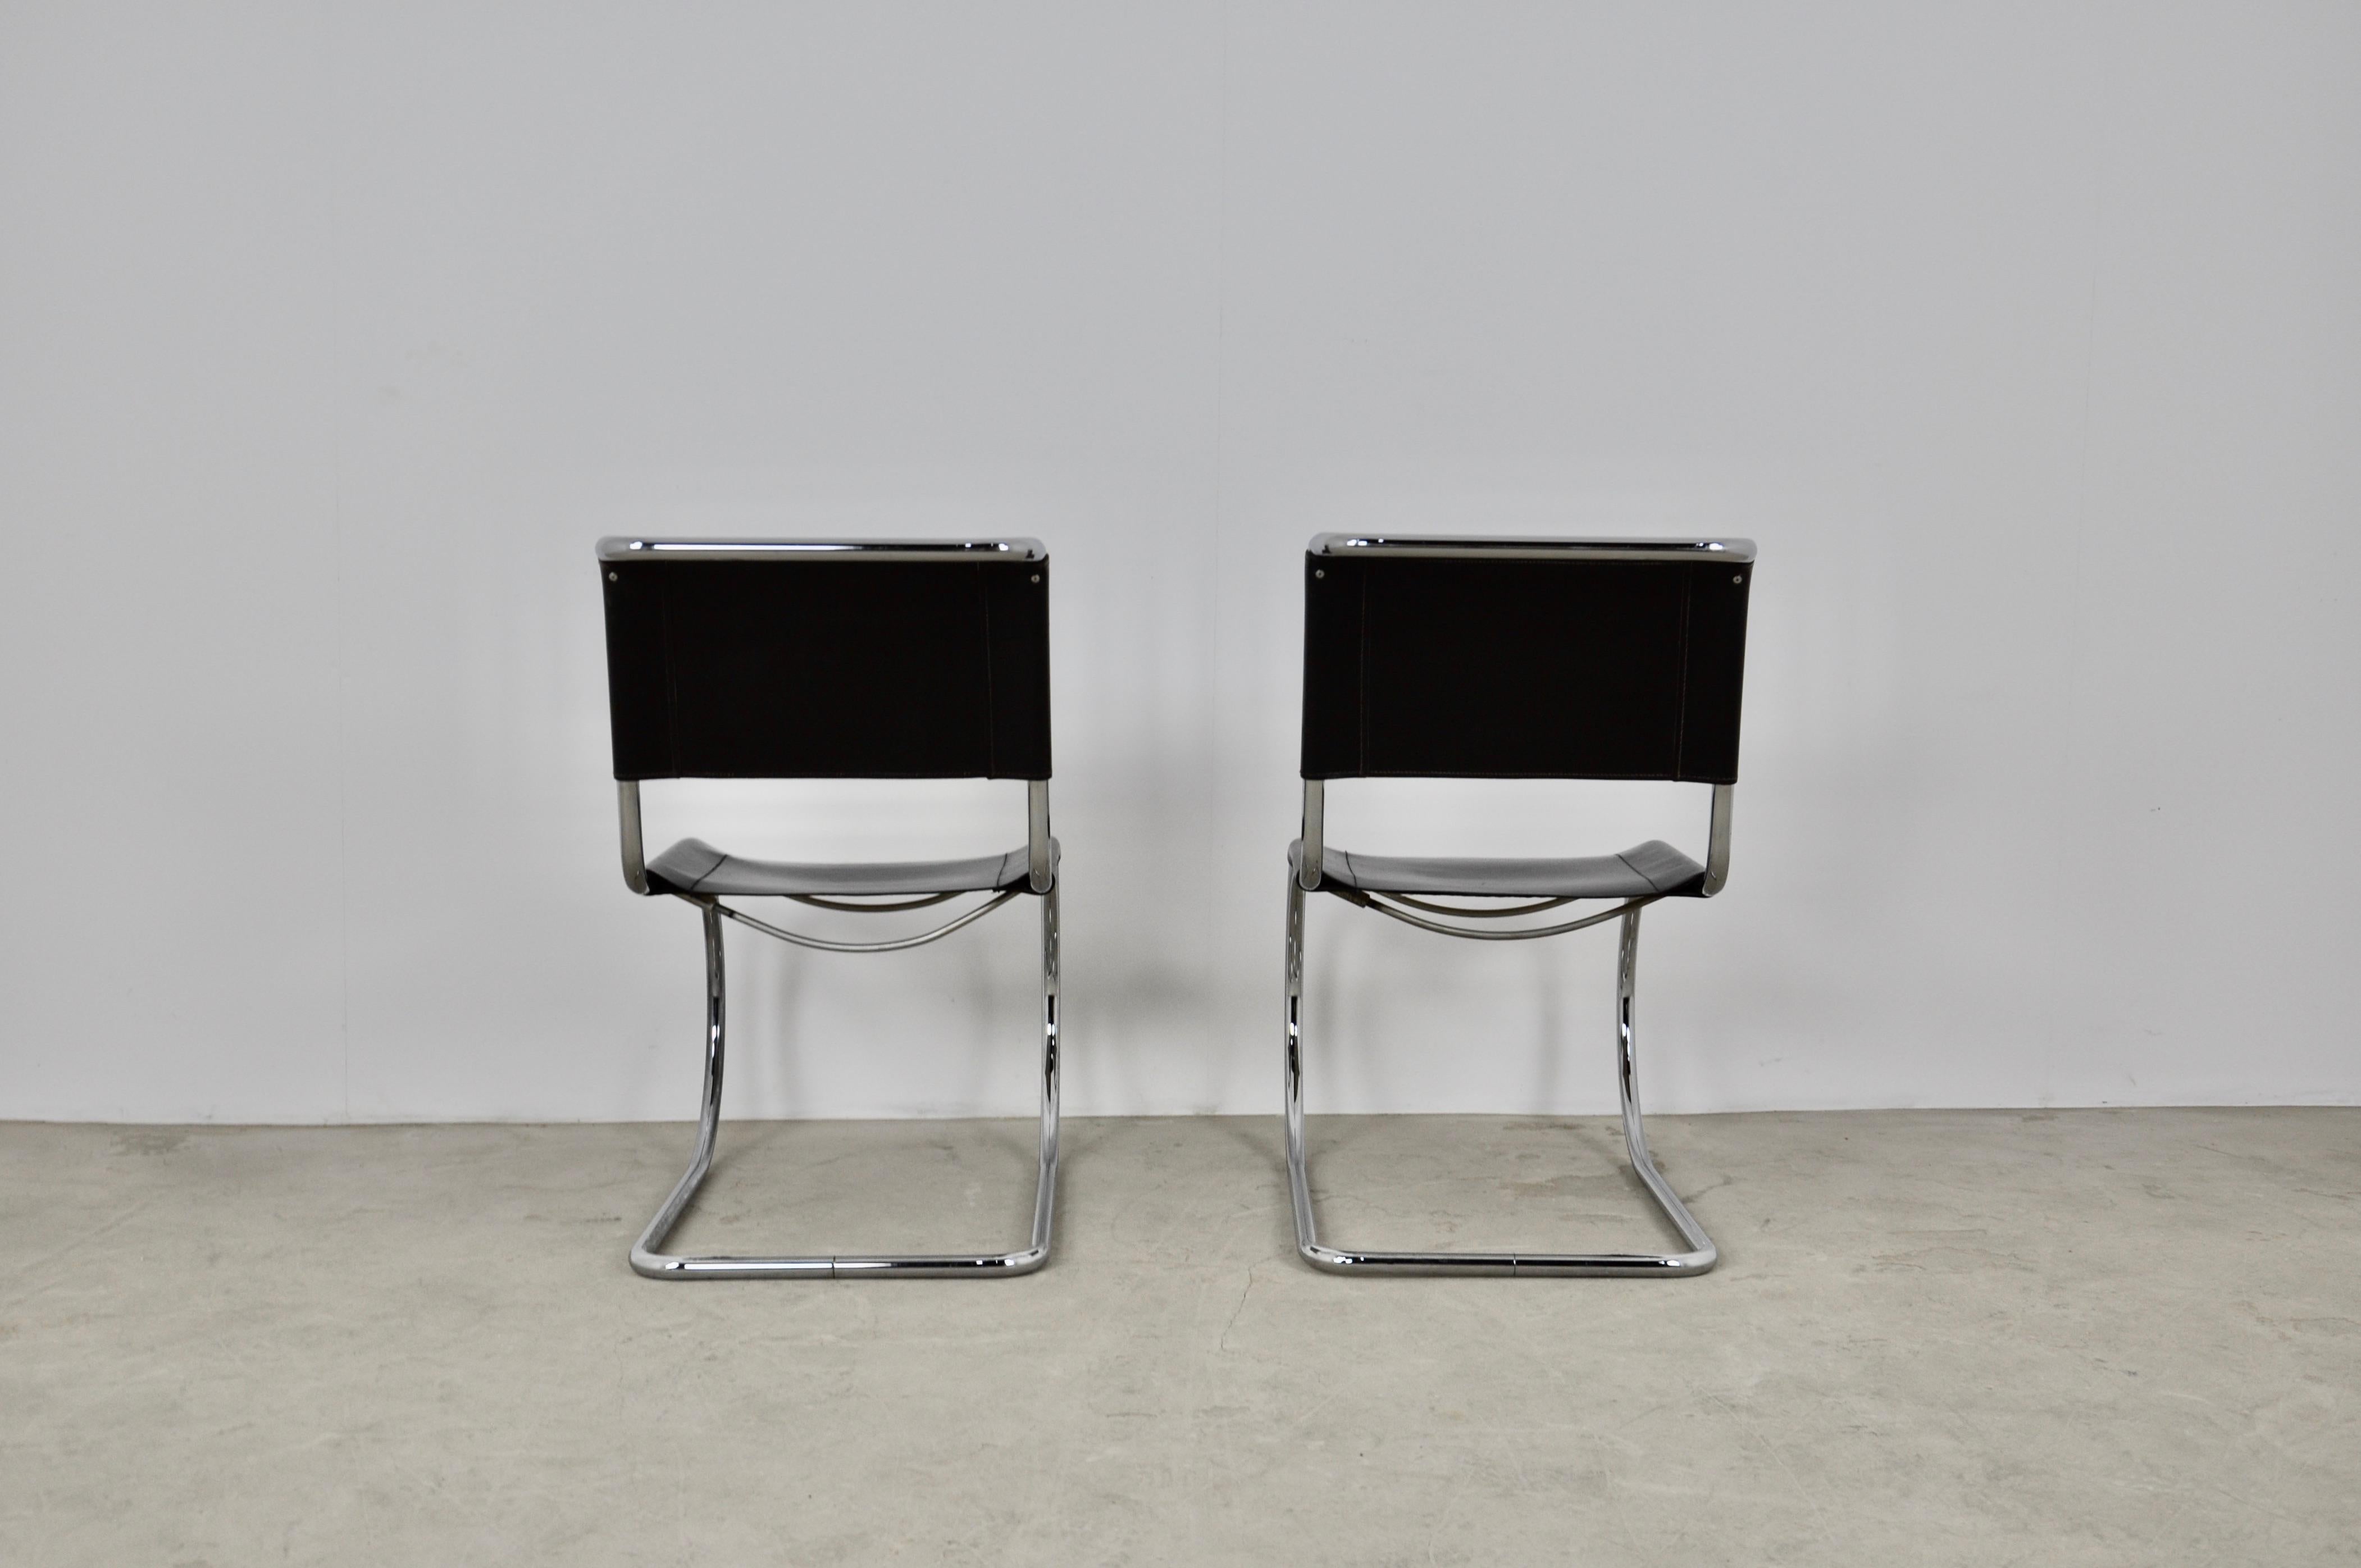 Late 20th Century Bauhaus Chrome MR 10 Chair by Ludwig Mies van der Rohe for Thonet